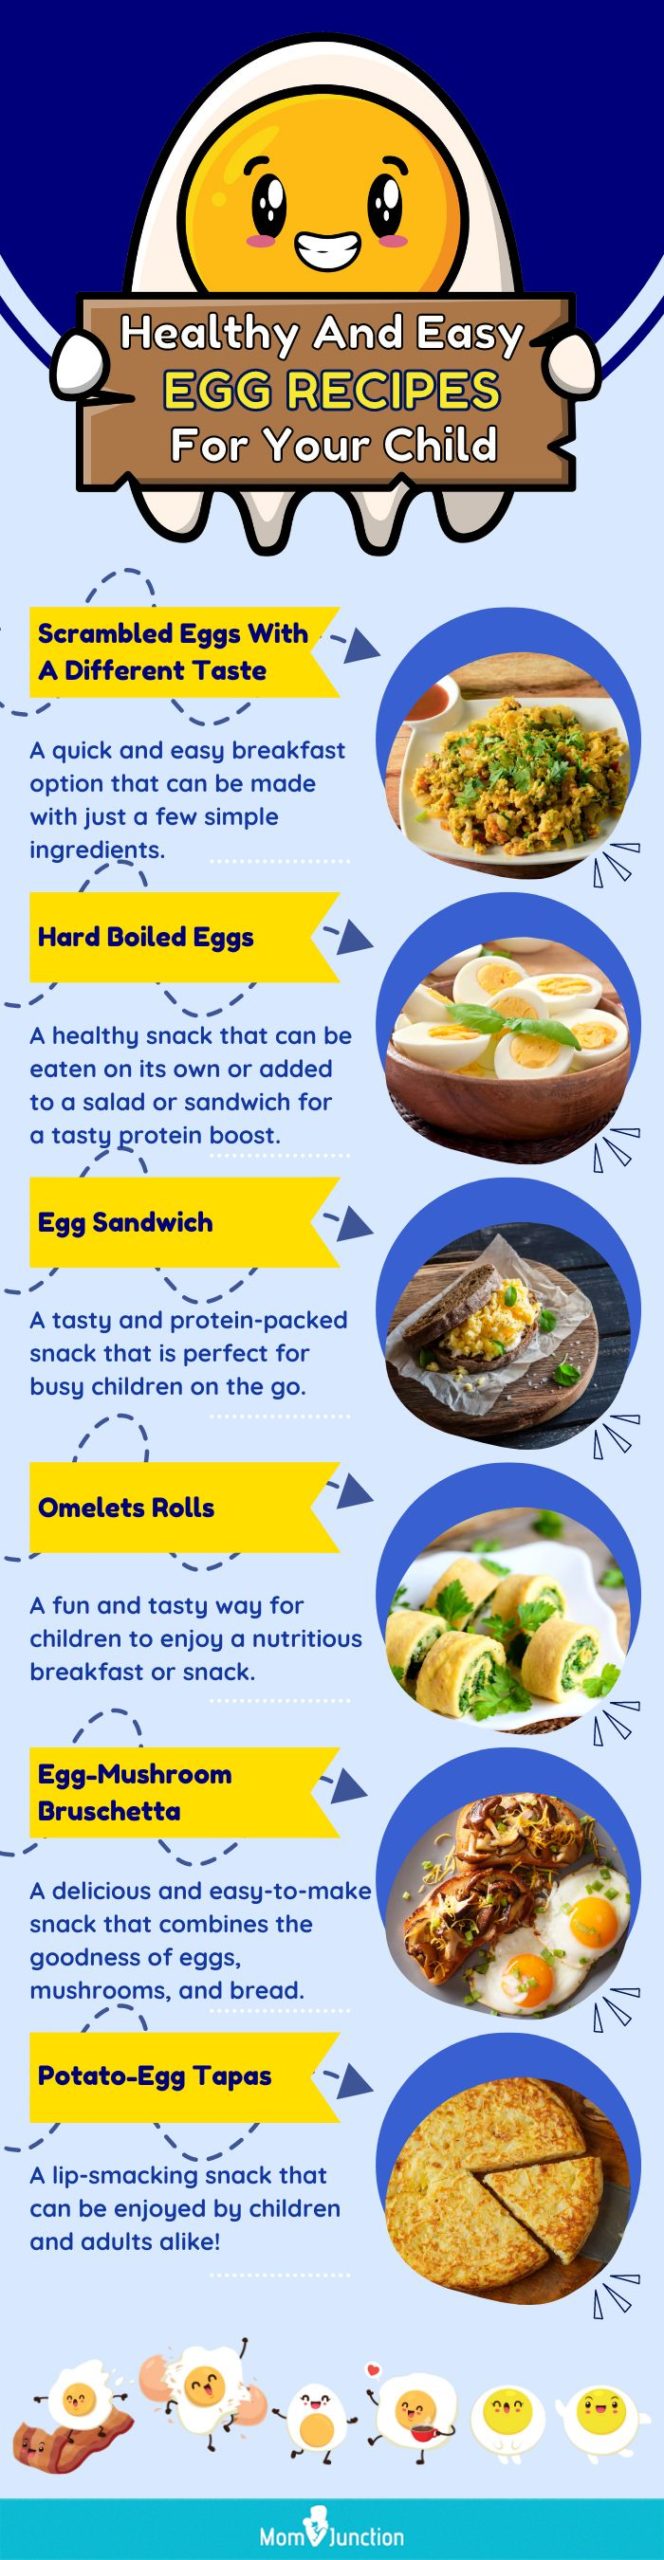 healthy and easy egg recipes for your child (infographic)